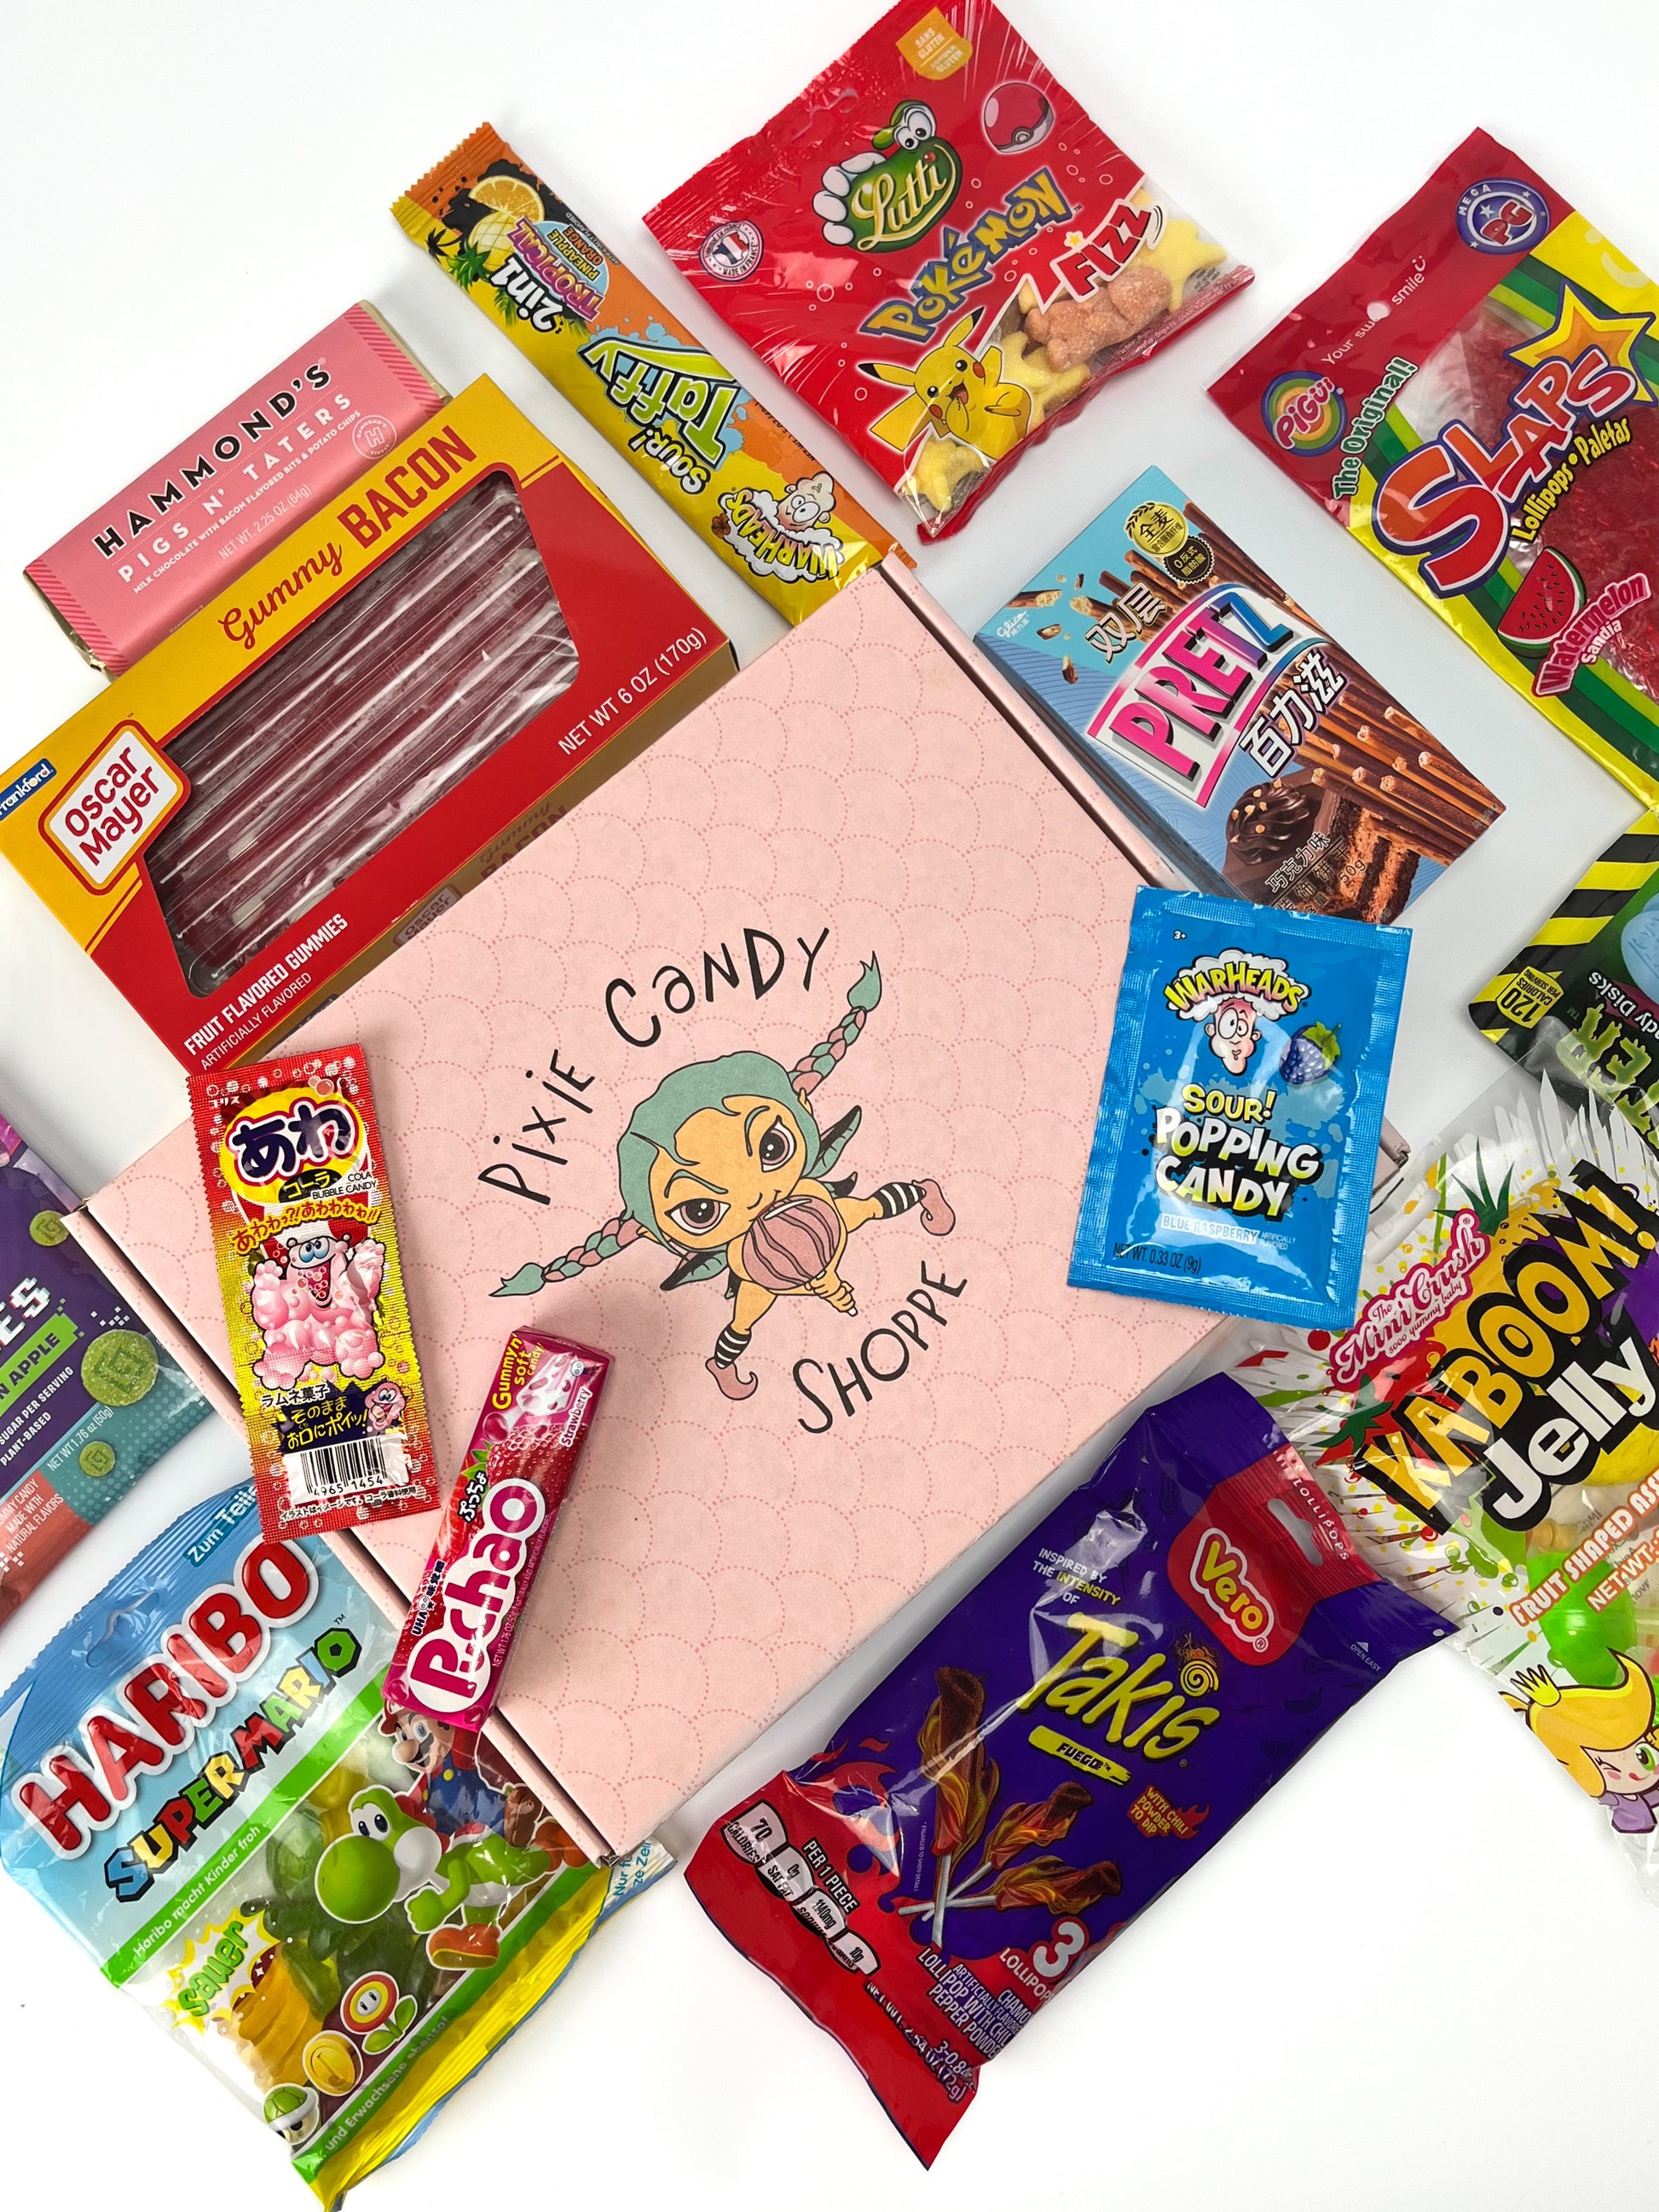 Trending Candy Mystery Box Magical Mystery Box Pixie Candy Shoppe   